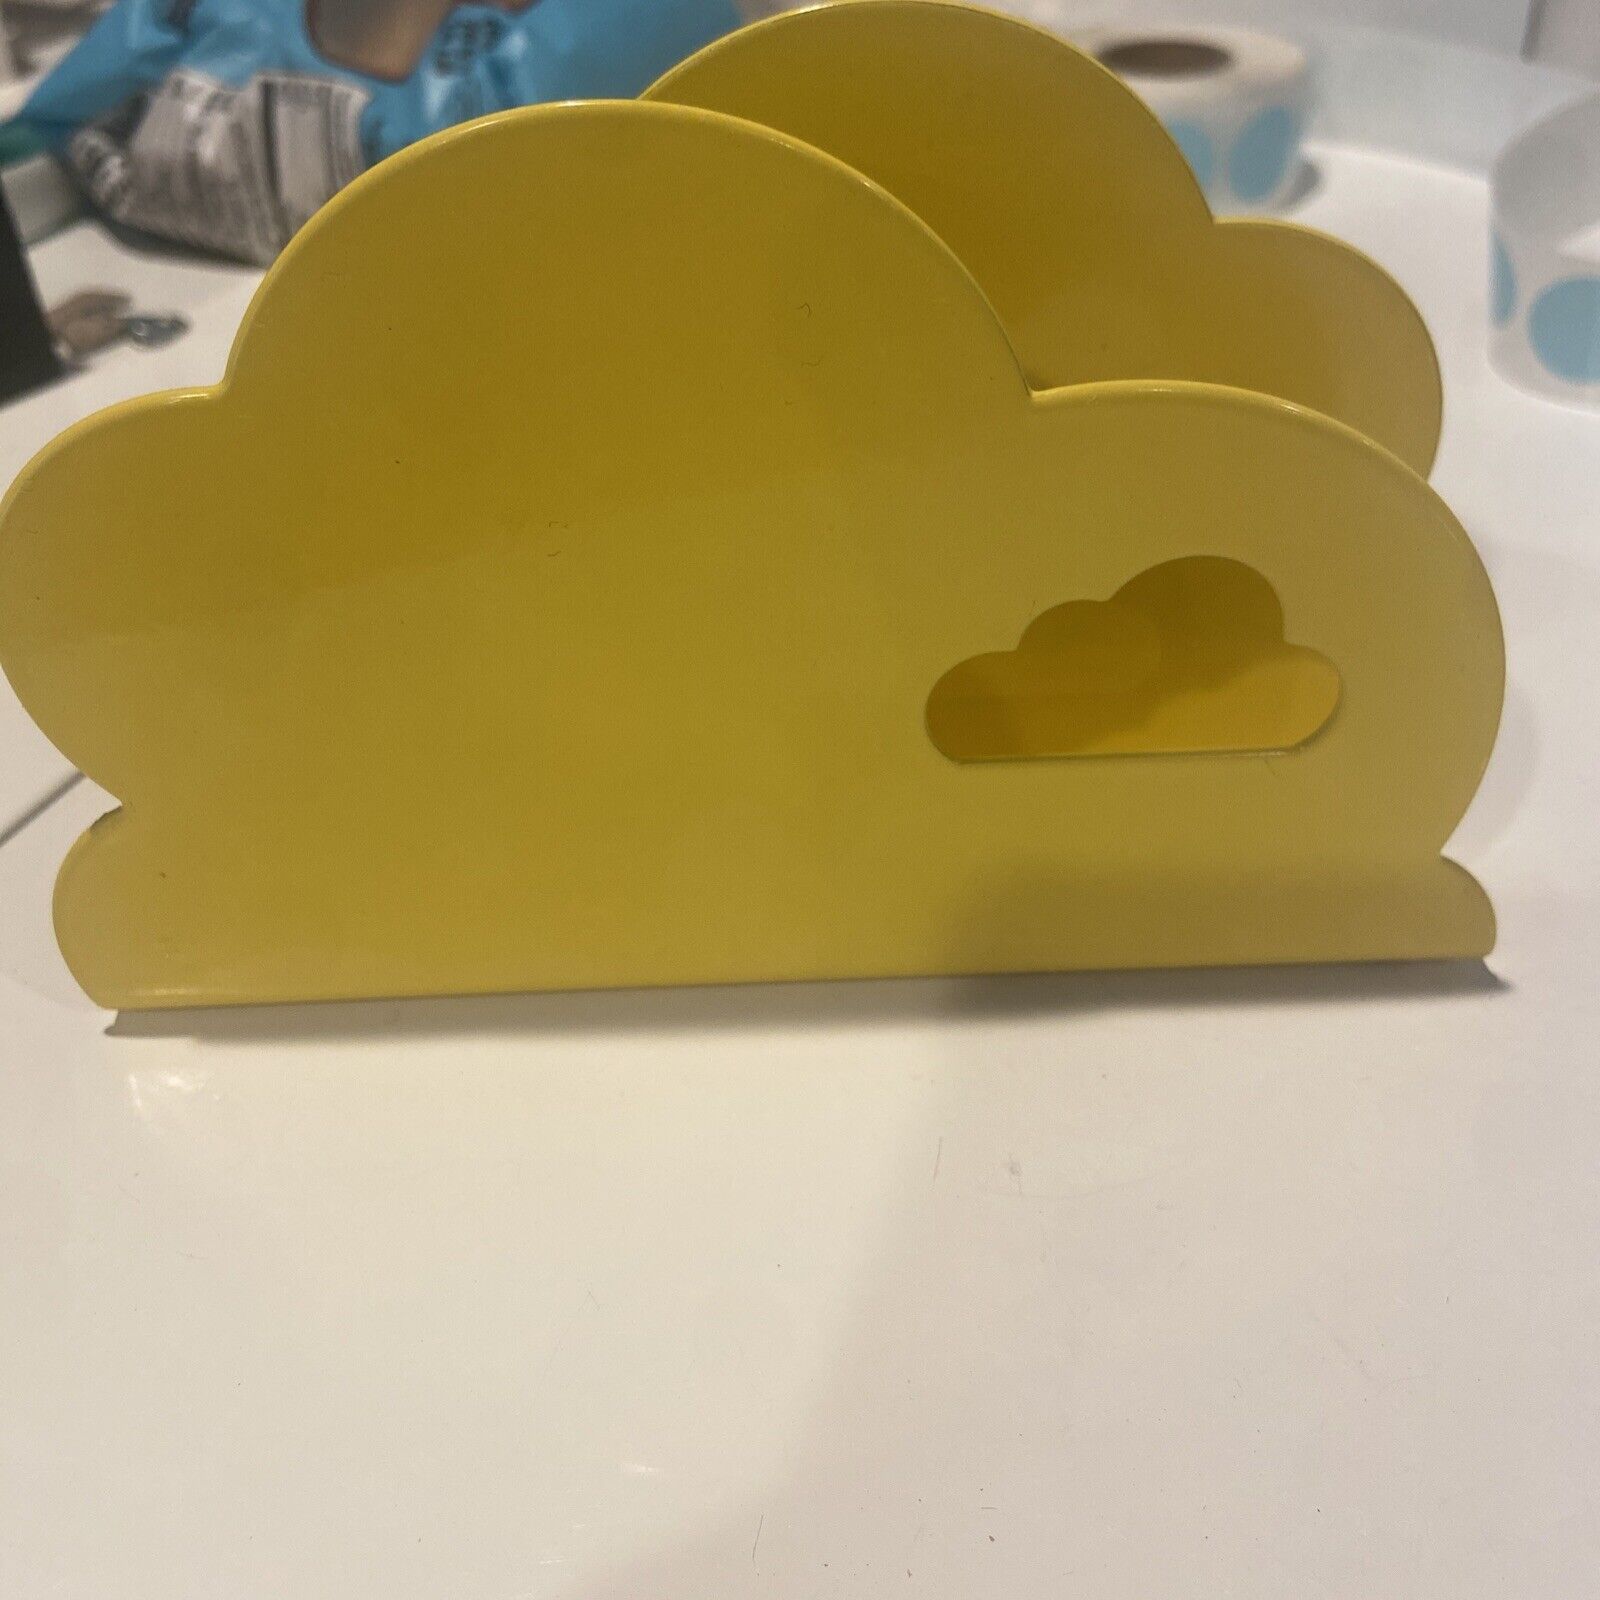 IKEA Yellow Cloud Napkin Letter Mail Holder